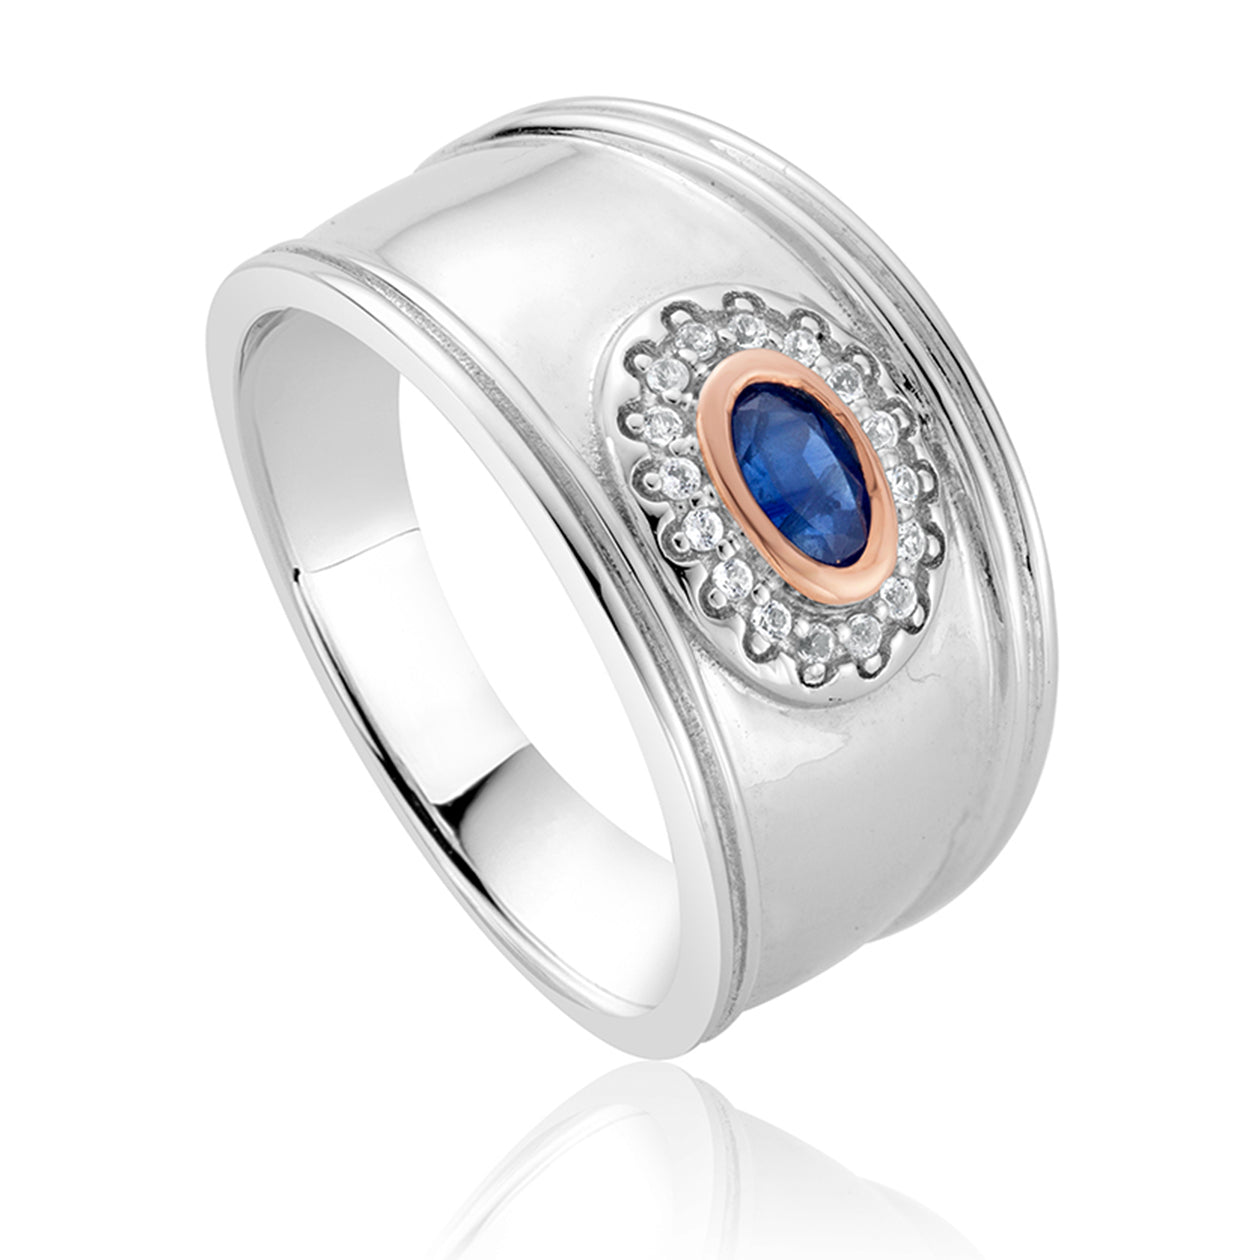 Clogau Princess Diana Sterling Silver Sapphire Wide Ring